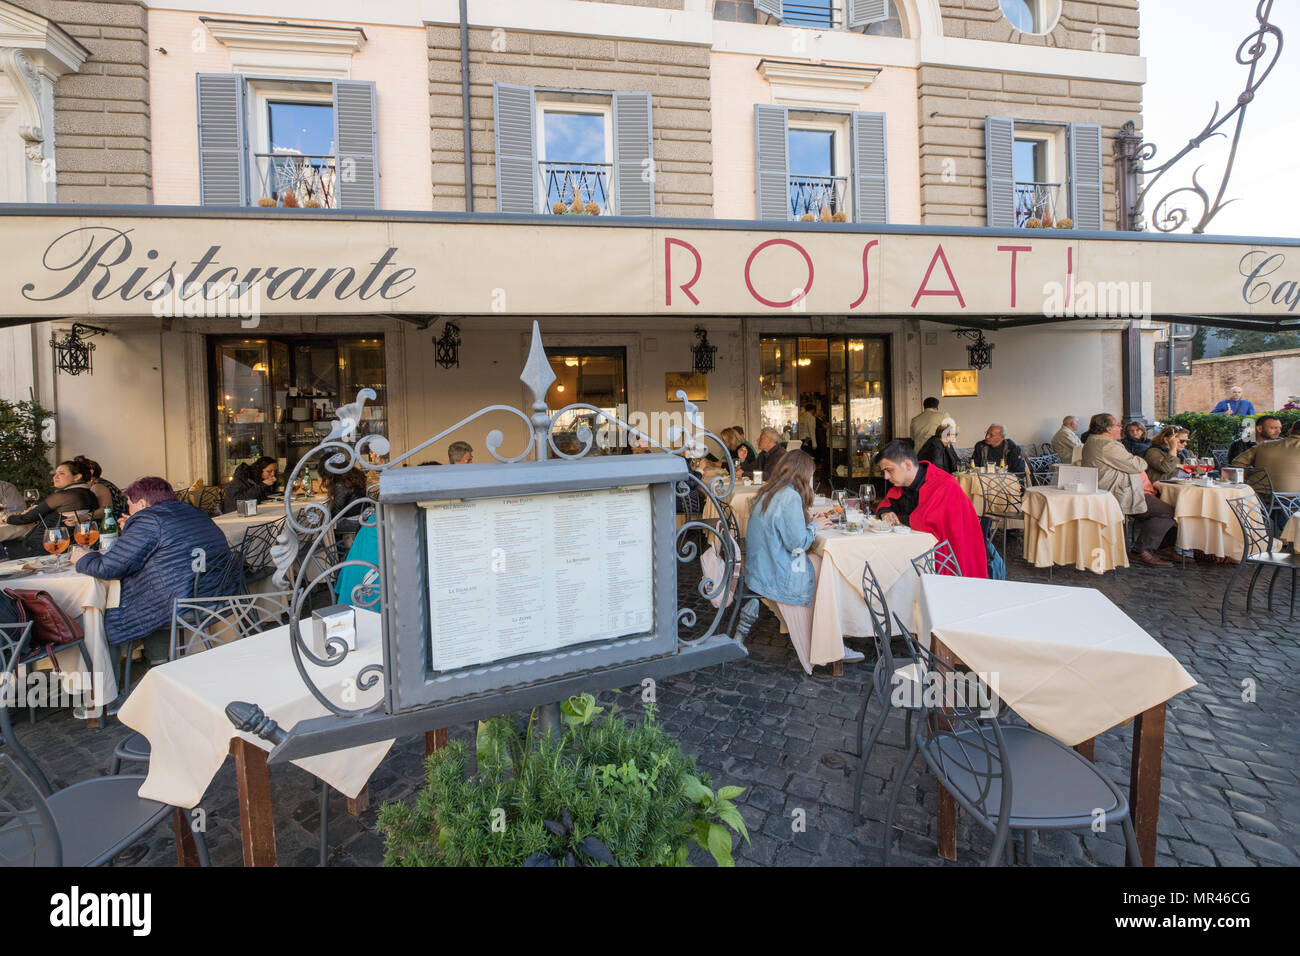 Caffe Rosati High Resolution Stock Photography and Images - Alamy